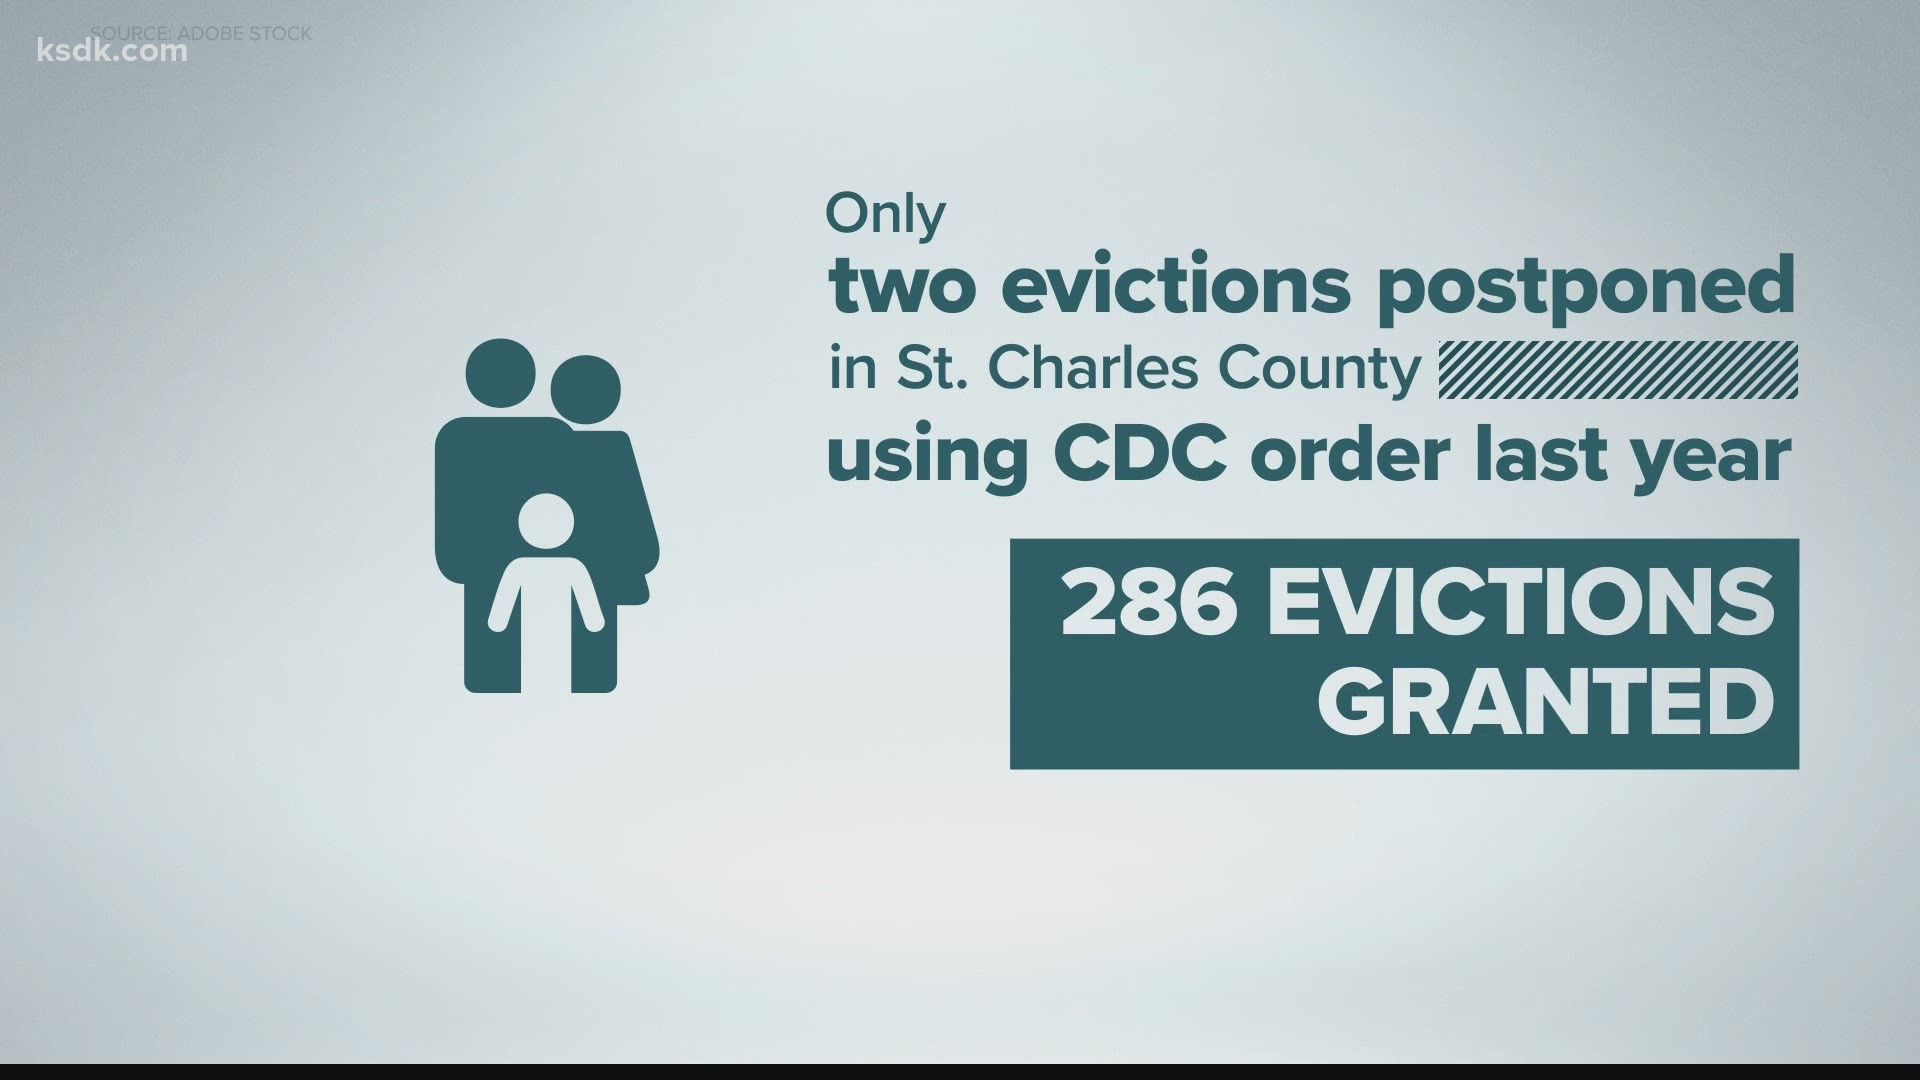 Legal expert says the courts face an eviction "tsunami" even with a CDC order in place to keep people in their homes.